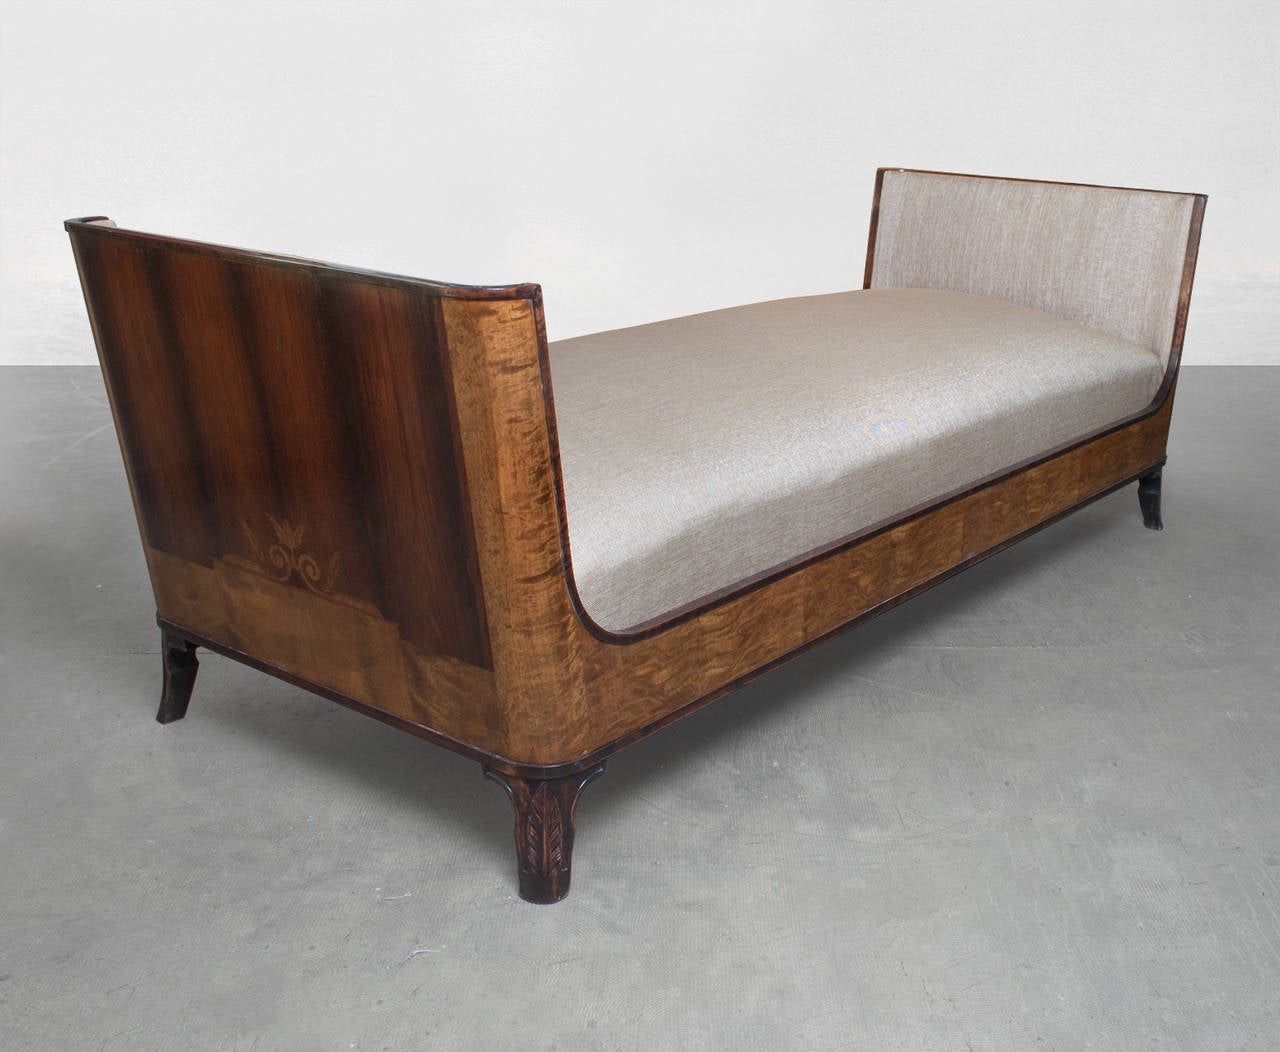 An elegant Swedish art deco daybed with birch and rosewood veneer and neoclassical inspired marquetry. Designed by Erik Chambert, Norrkoping circa late 1920's early 1930's. Restored in excellent condition, newly upholstered. Length 79.5